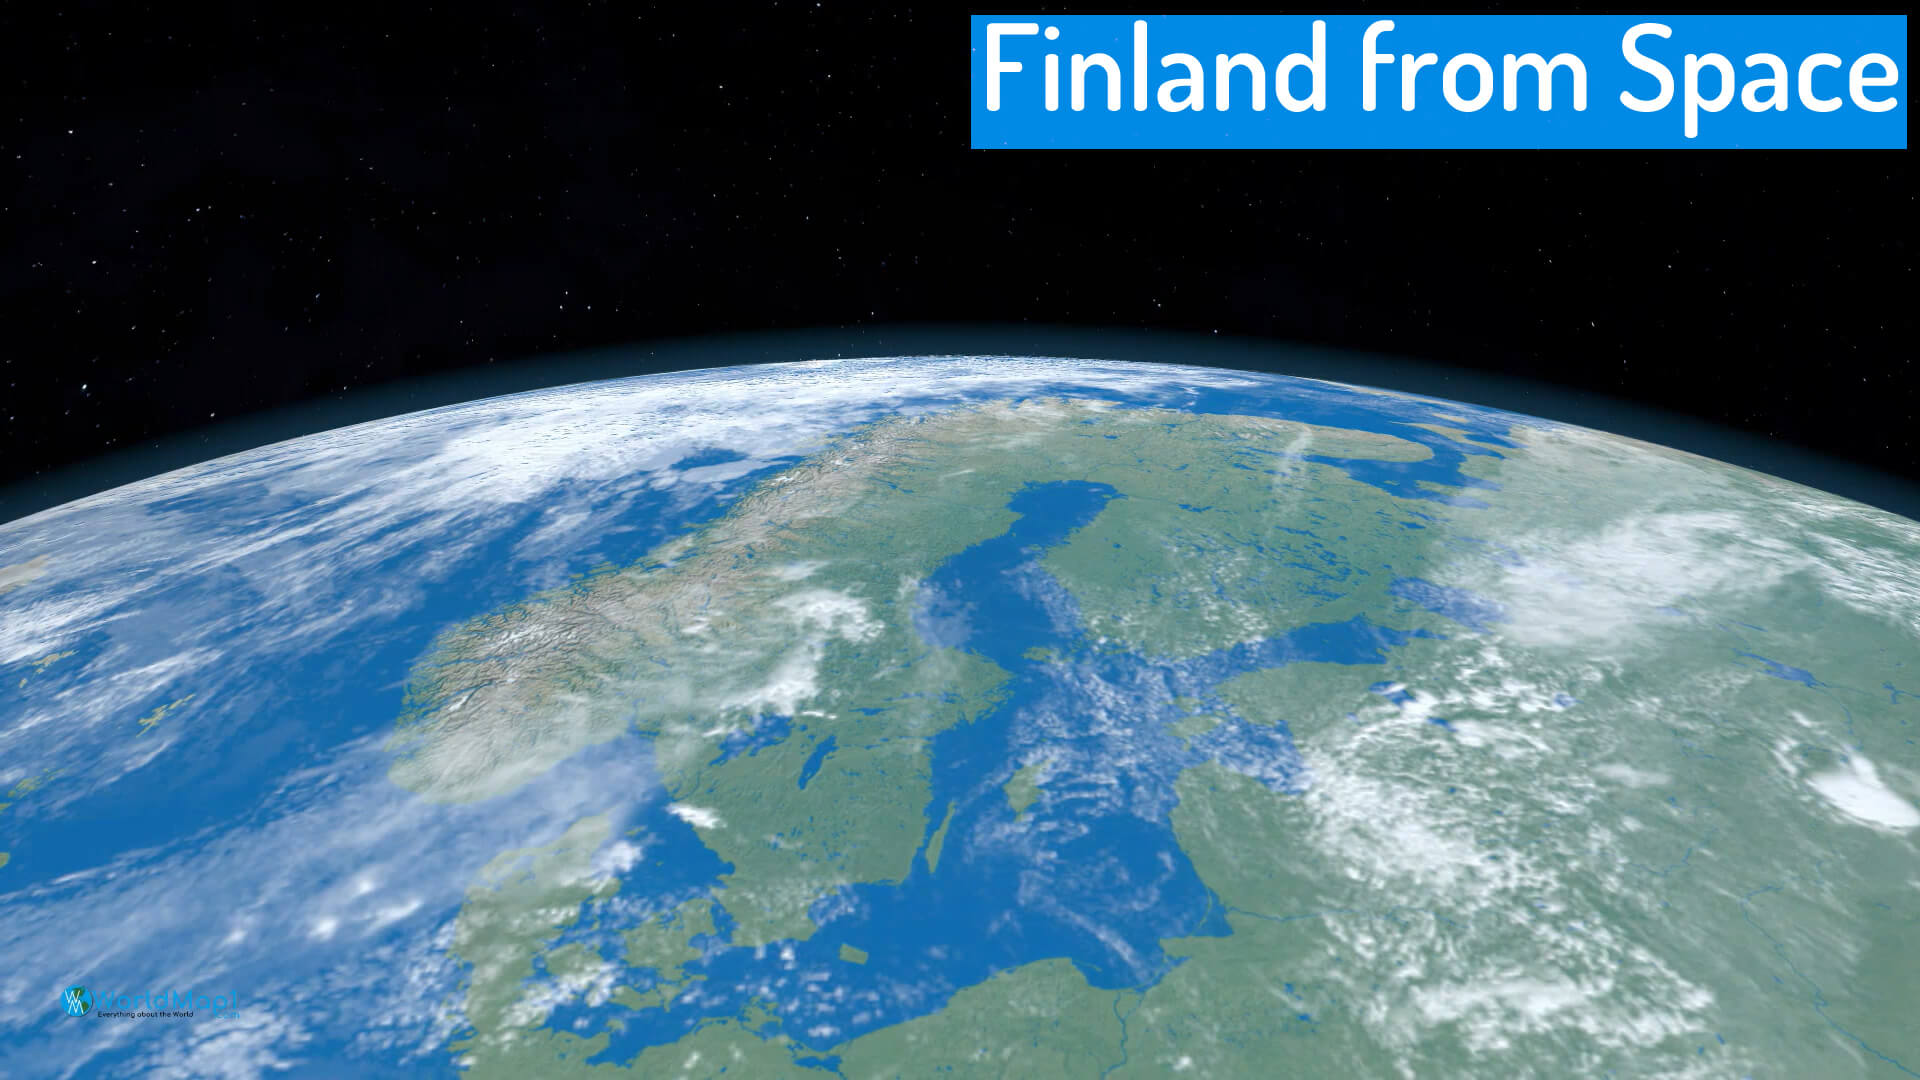 Finland from Space